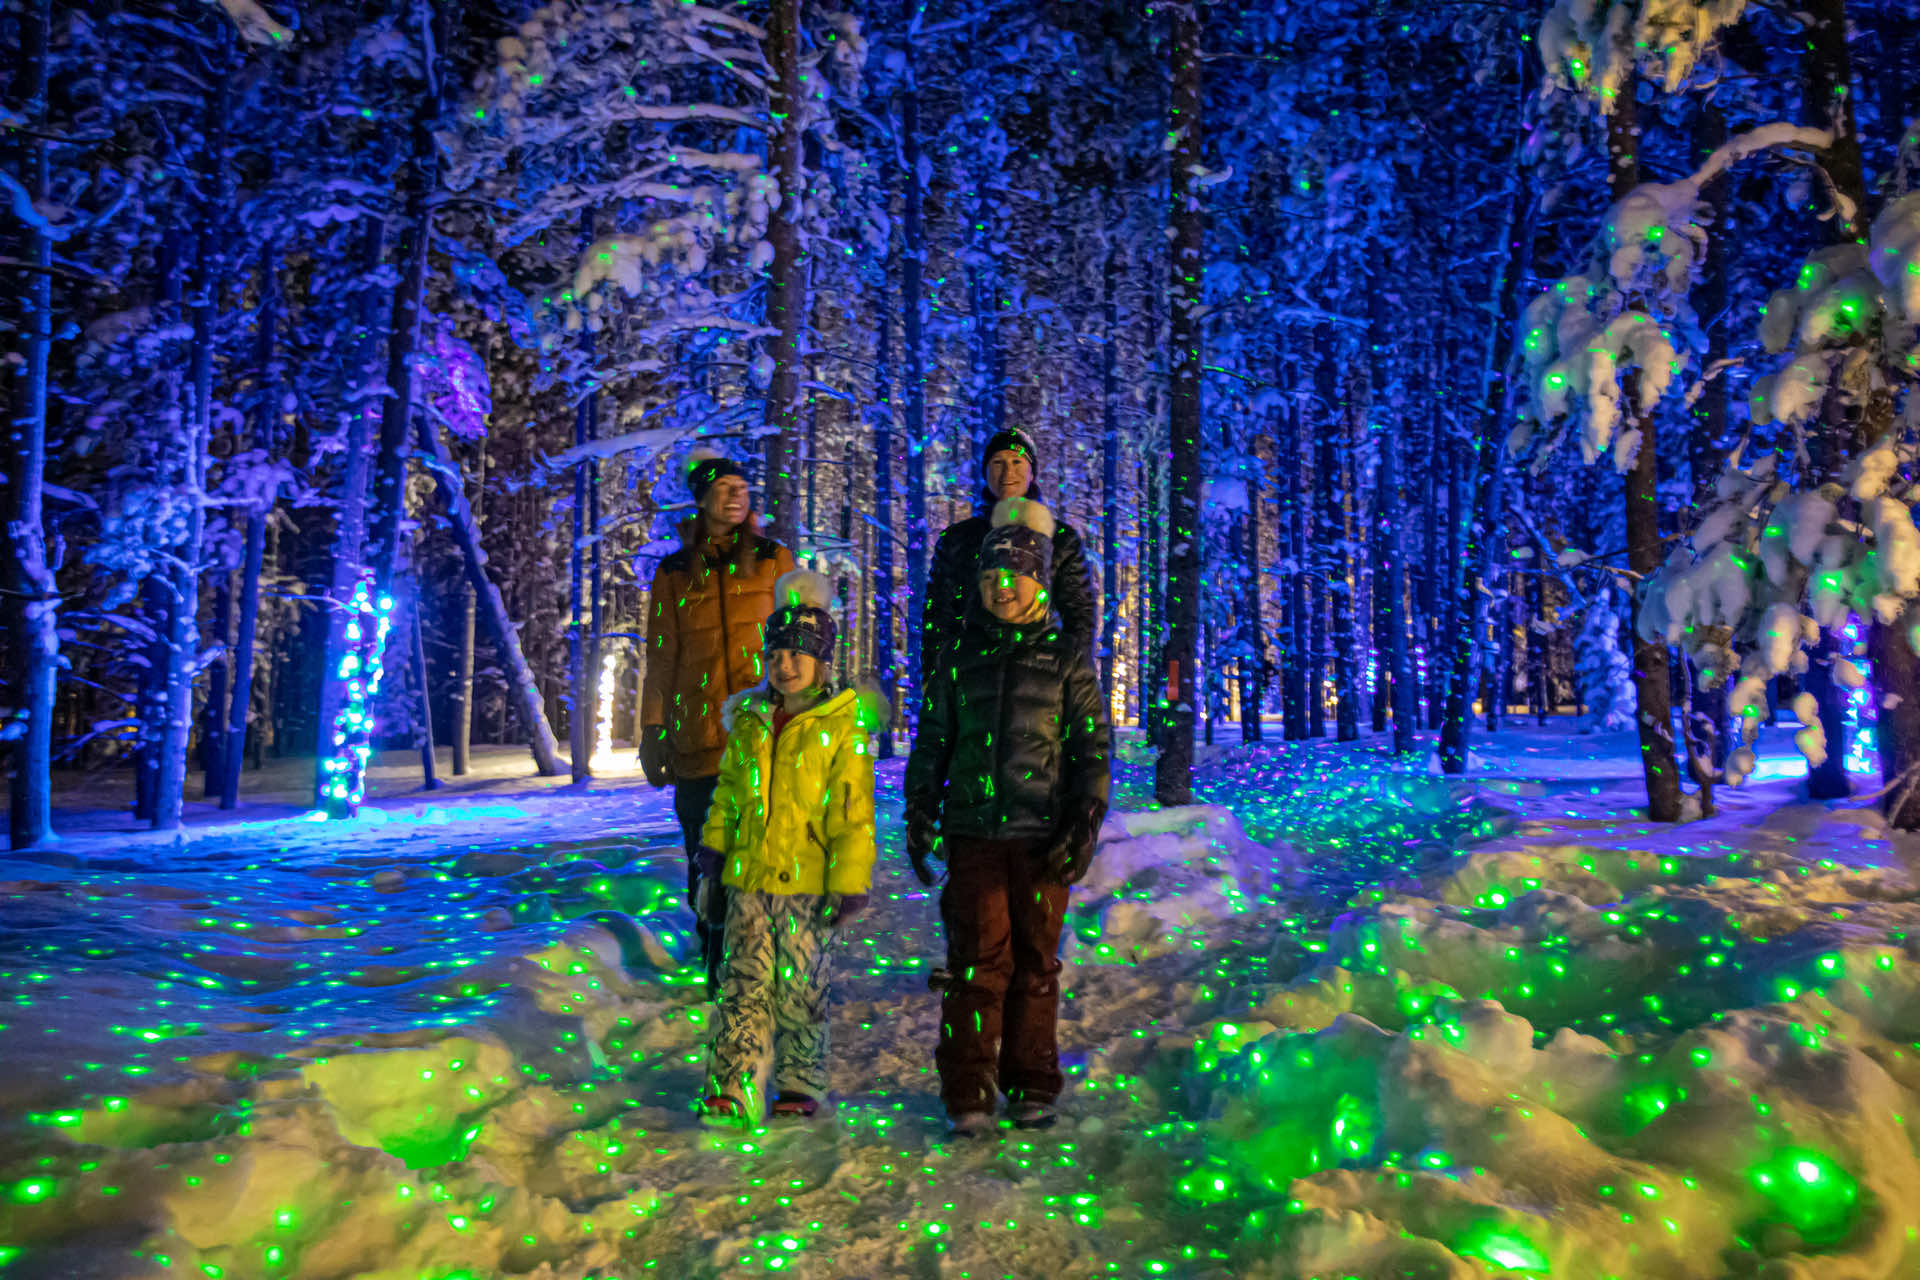 Family walking through the Enchanted Forest